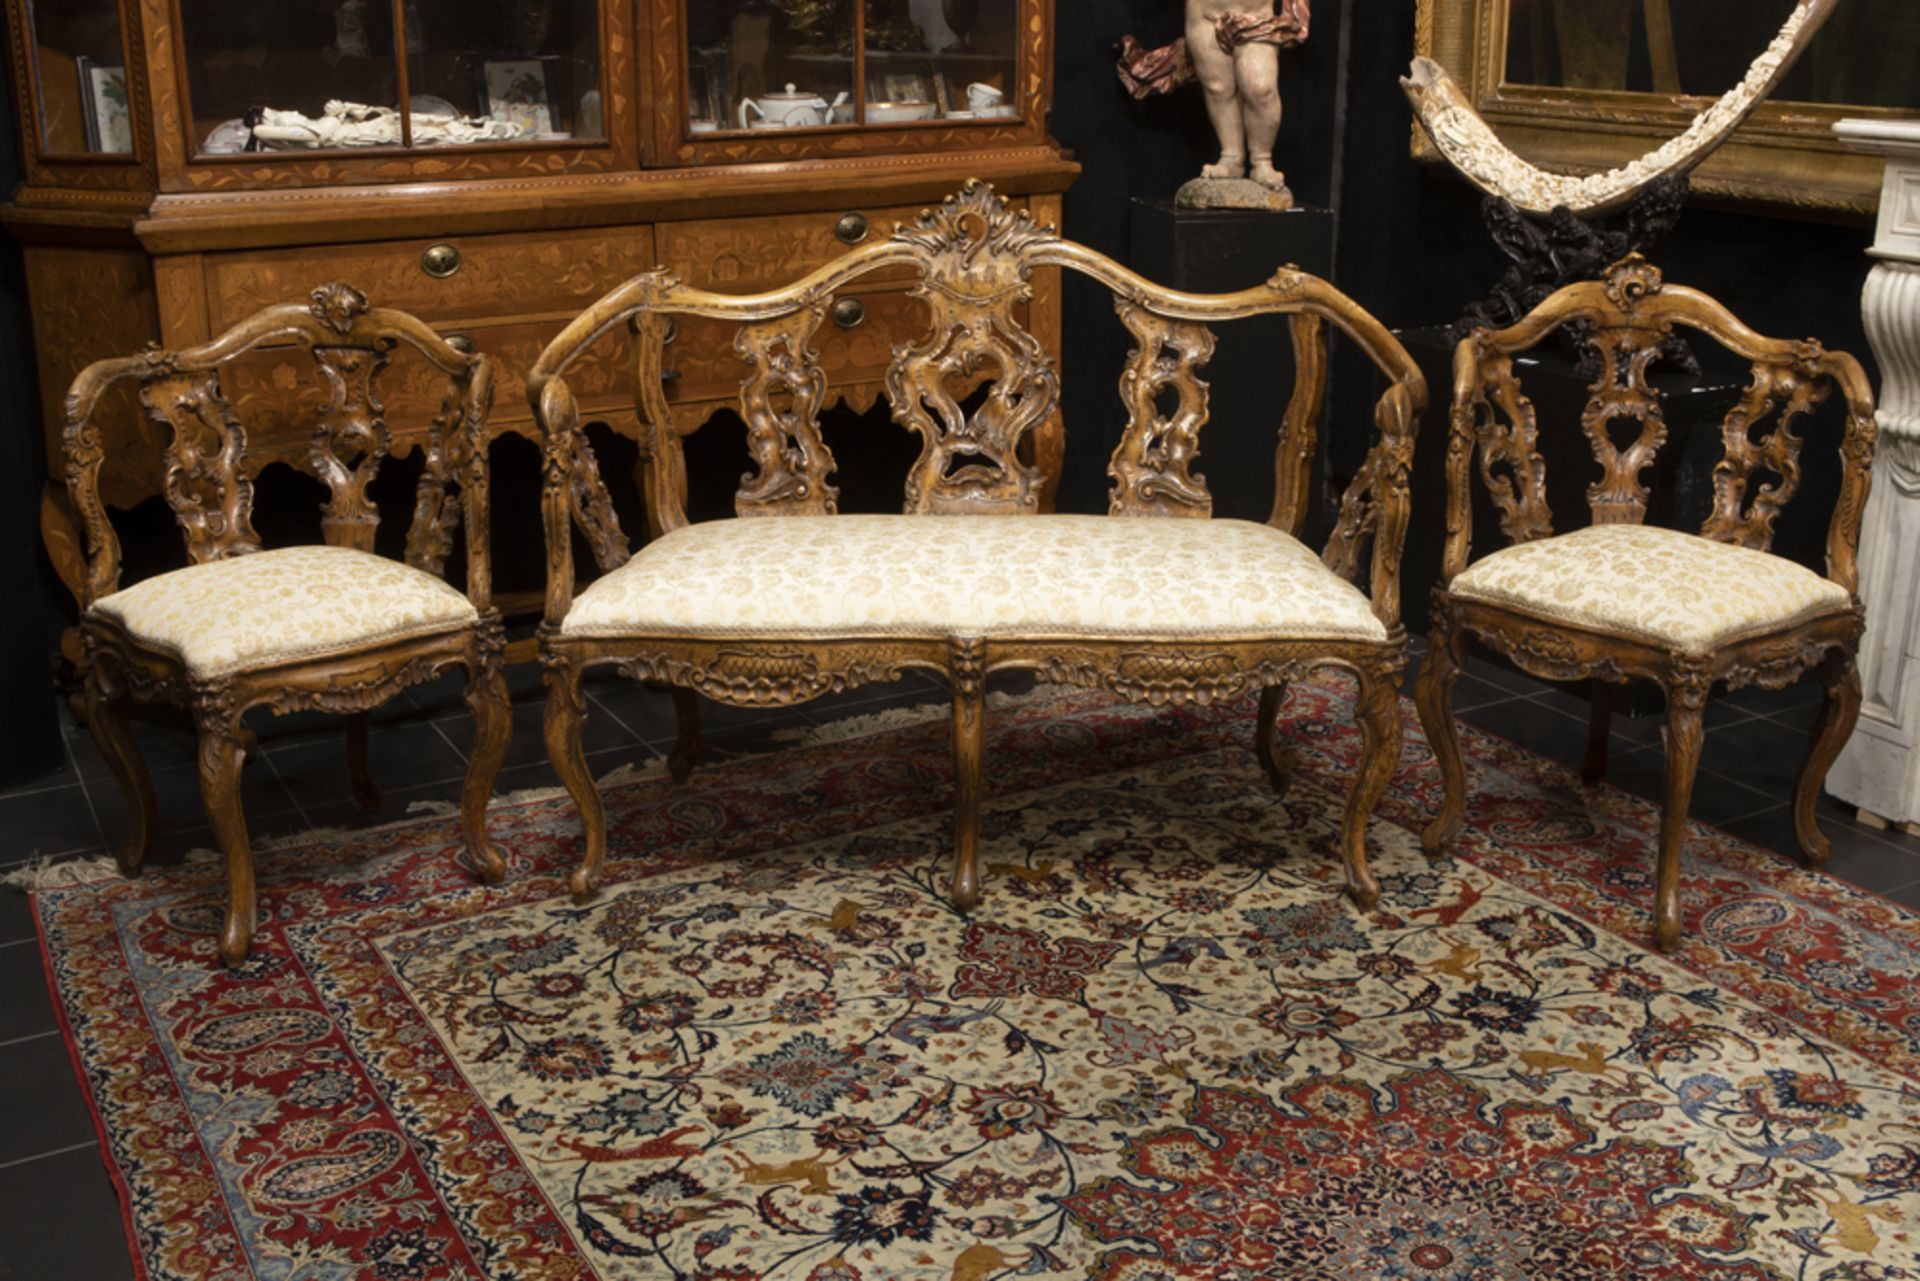 18th Cent. north Italian 3pc rococo style salon suite with an elegant design in walnut with very